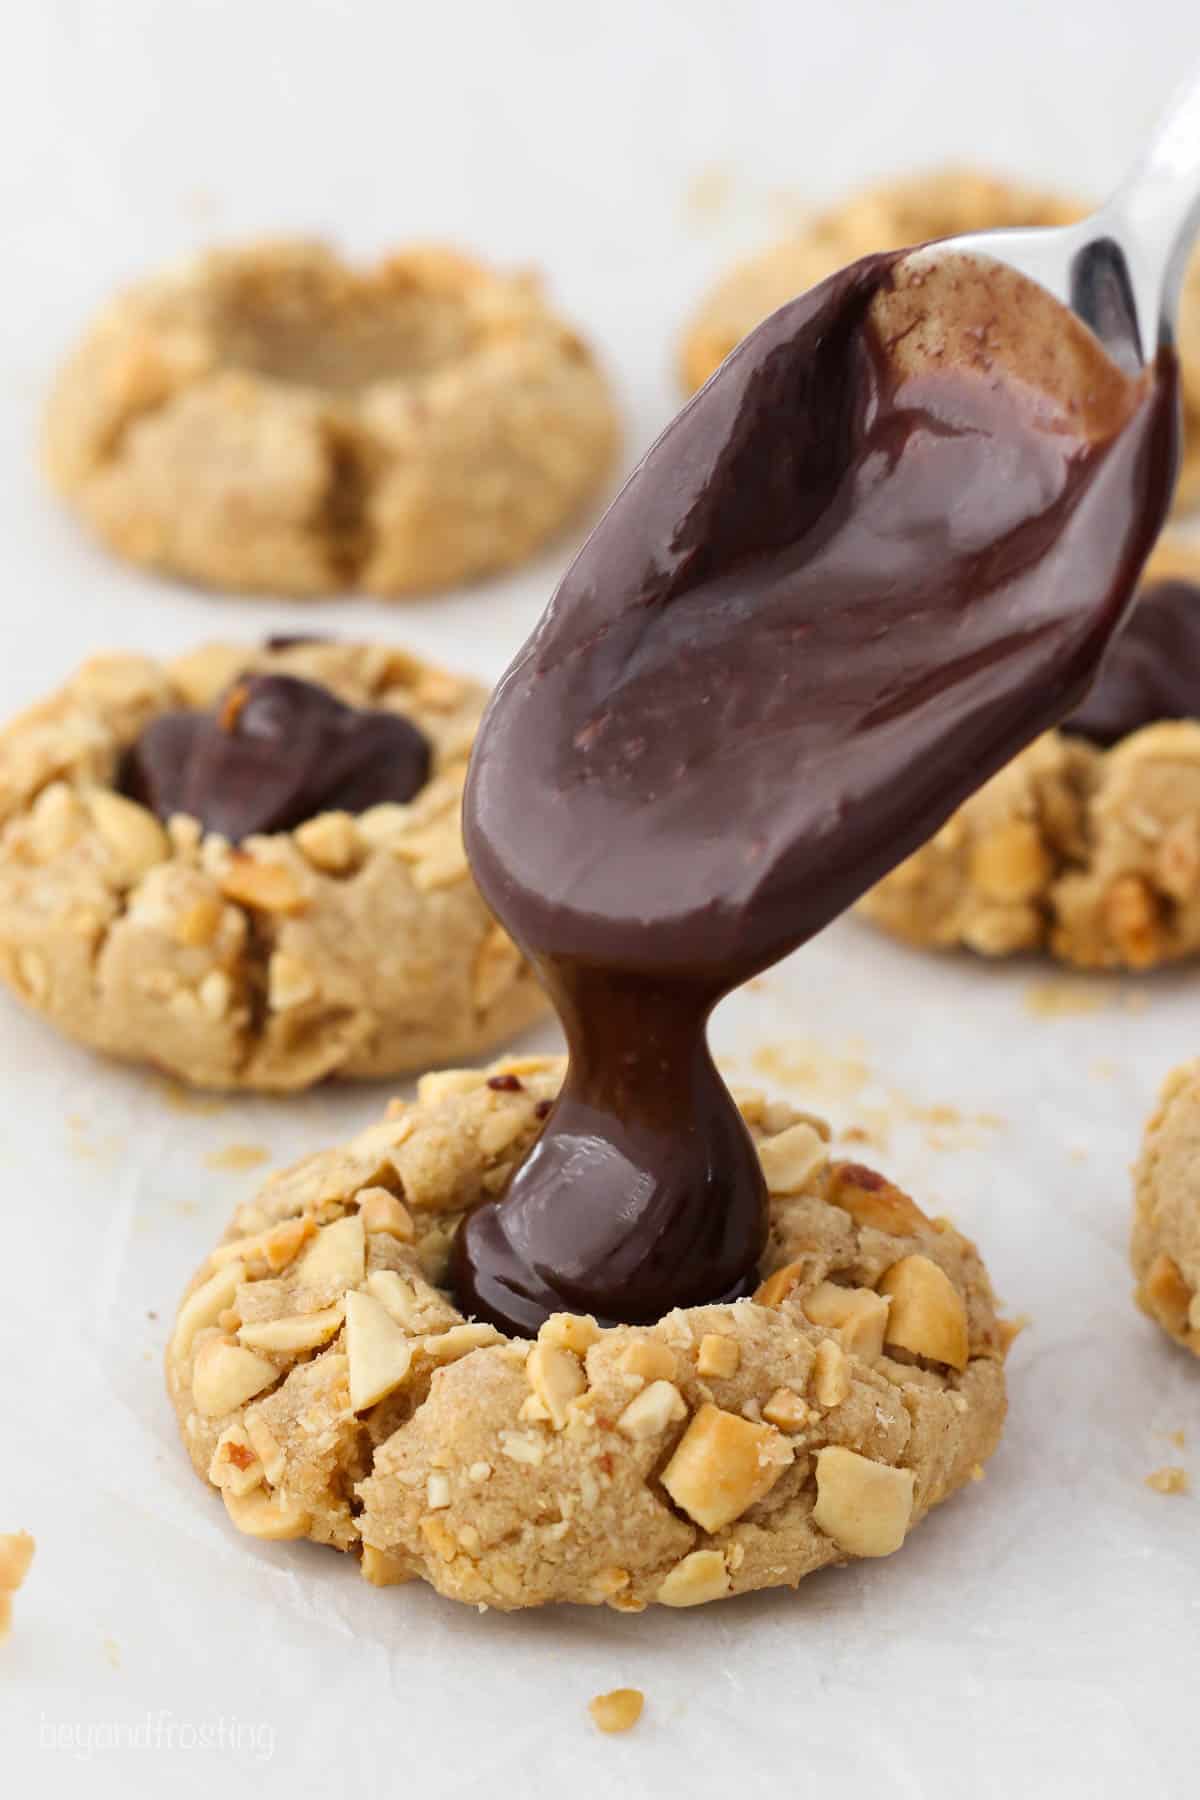 Chocolate dripping off a spoon into a peanut butter cookie